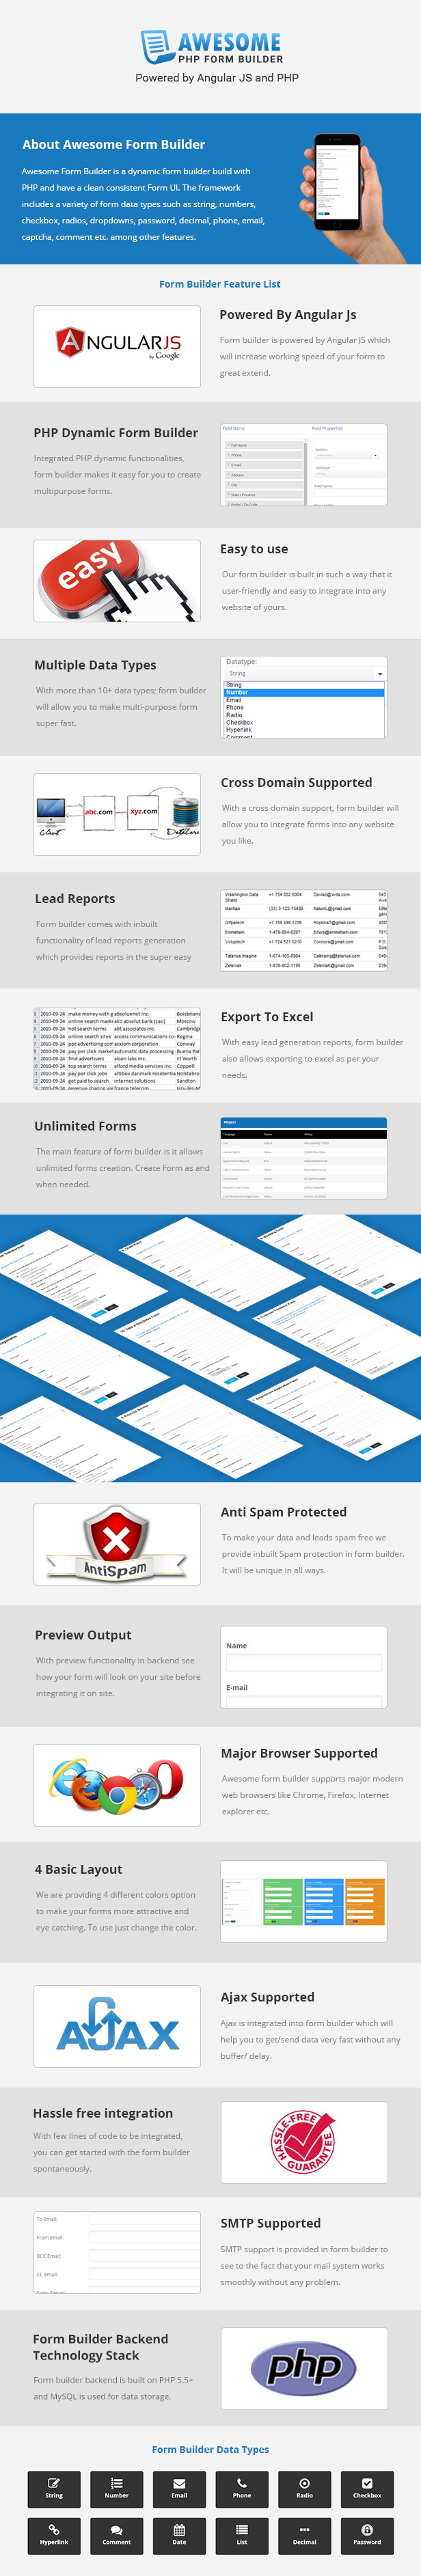 Awesome - Angular JS form builder PHP - 1